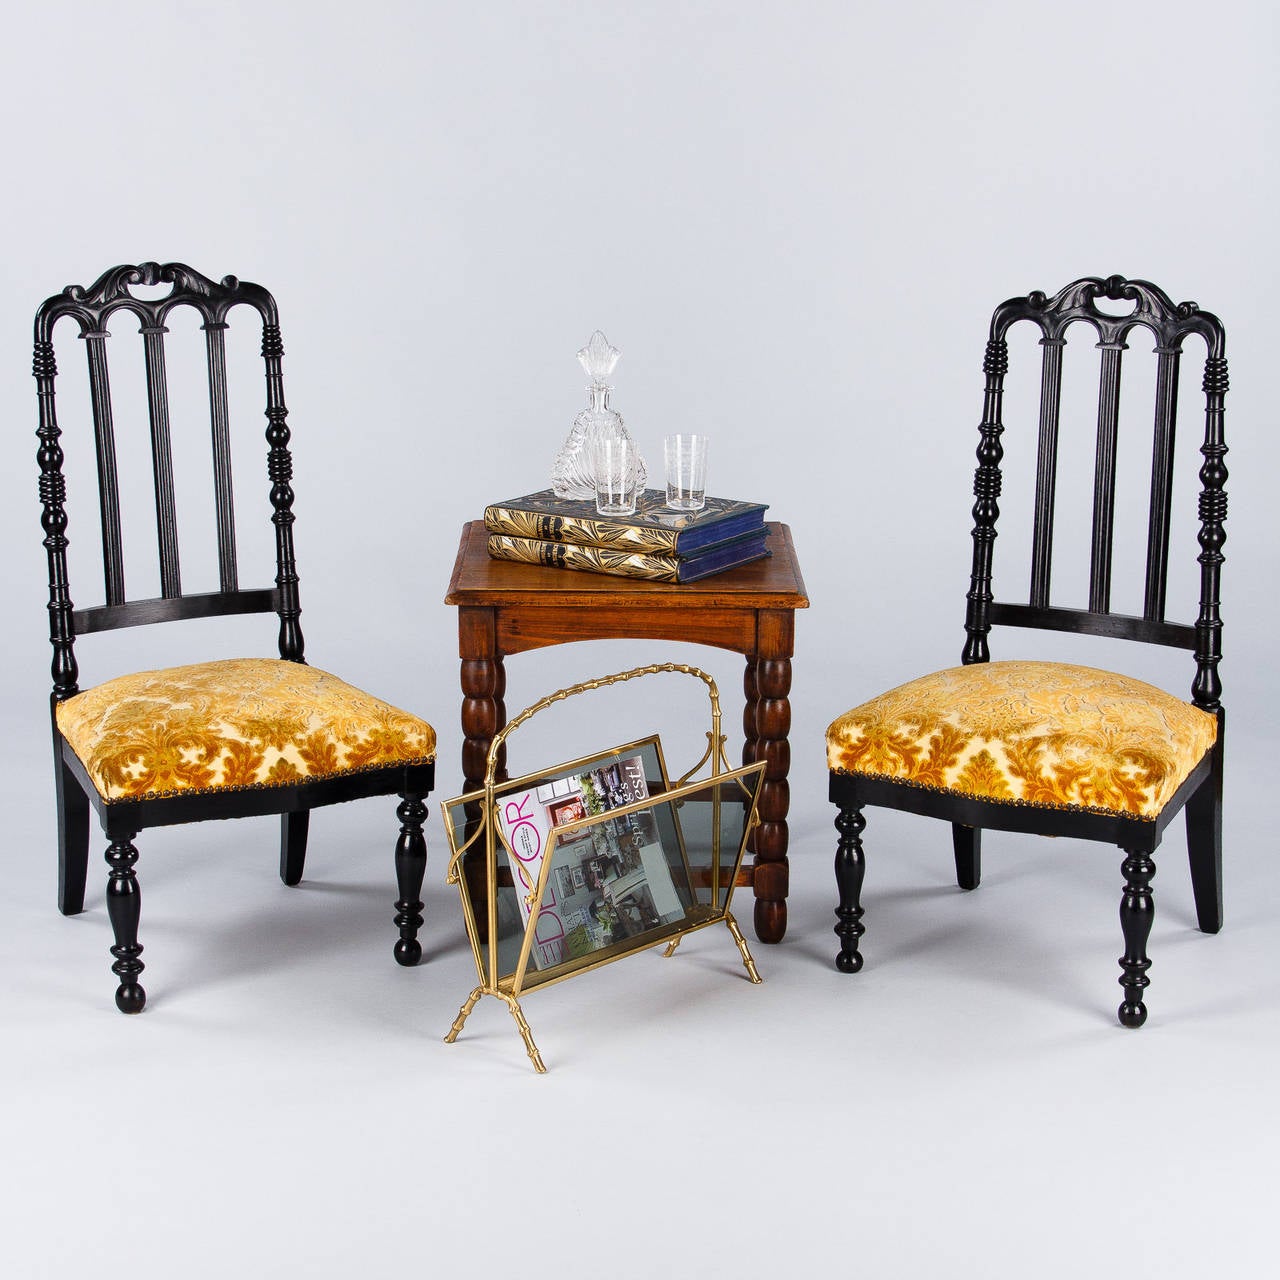 A pair of Napoleon III Chauffeuses, low chairs designed to sit by the fireplace, made of ebonized pear wood with their original floral upholstery. Dating from the 1870s, these chairs feature a slat back with a serpentine top rail and turned legs.